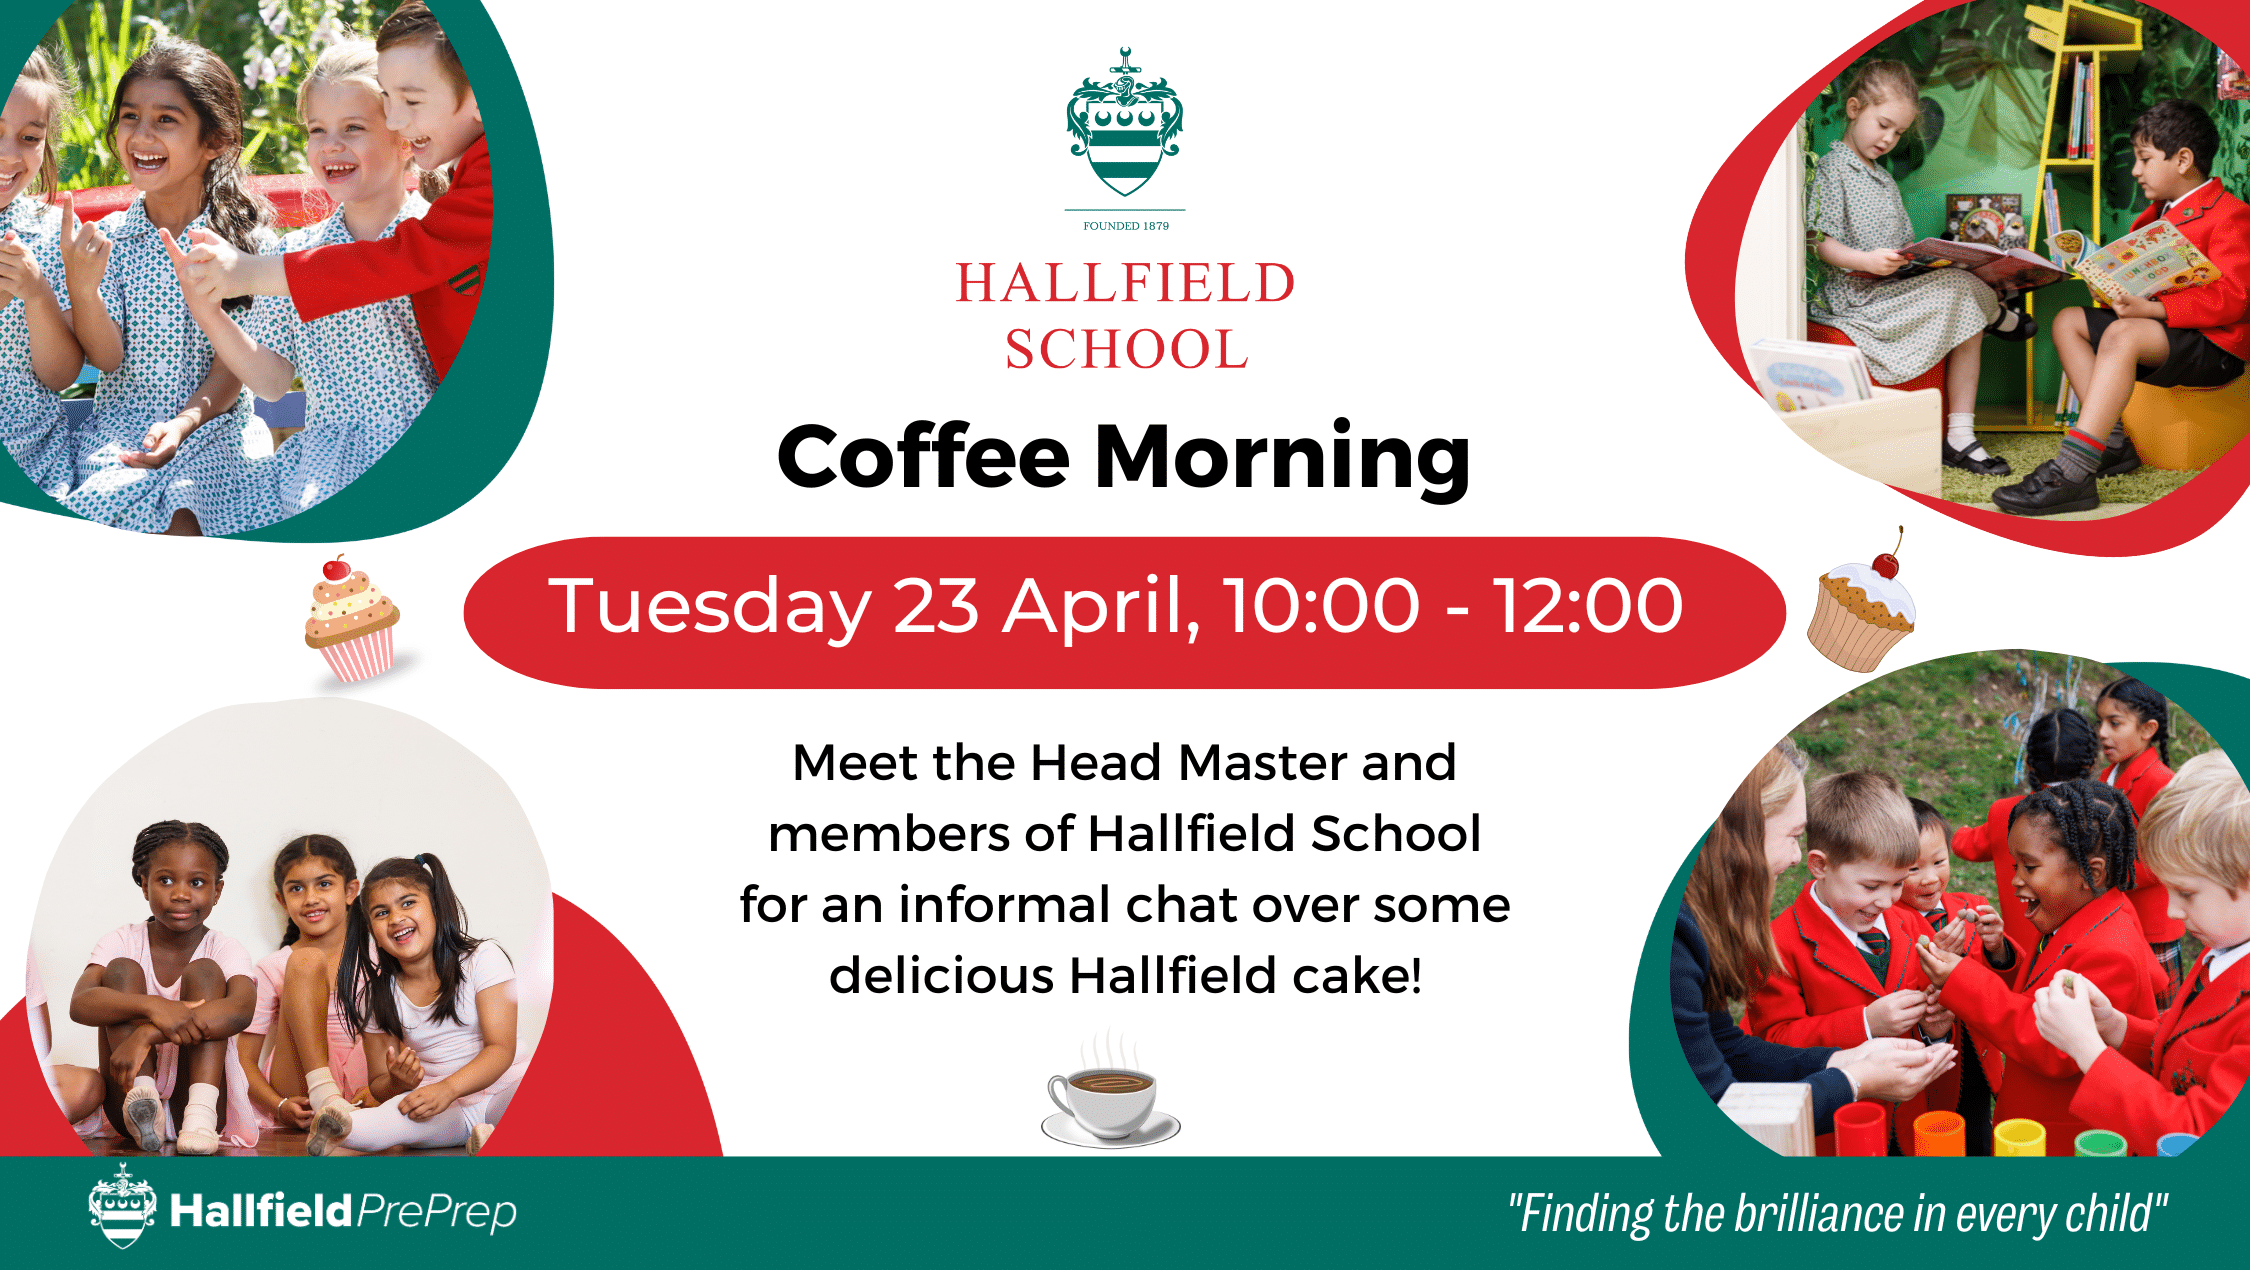 Coffee Morning: Tuesday 23 April